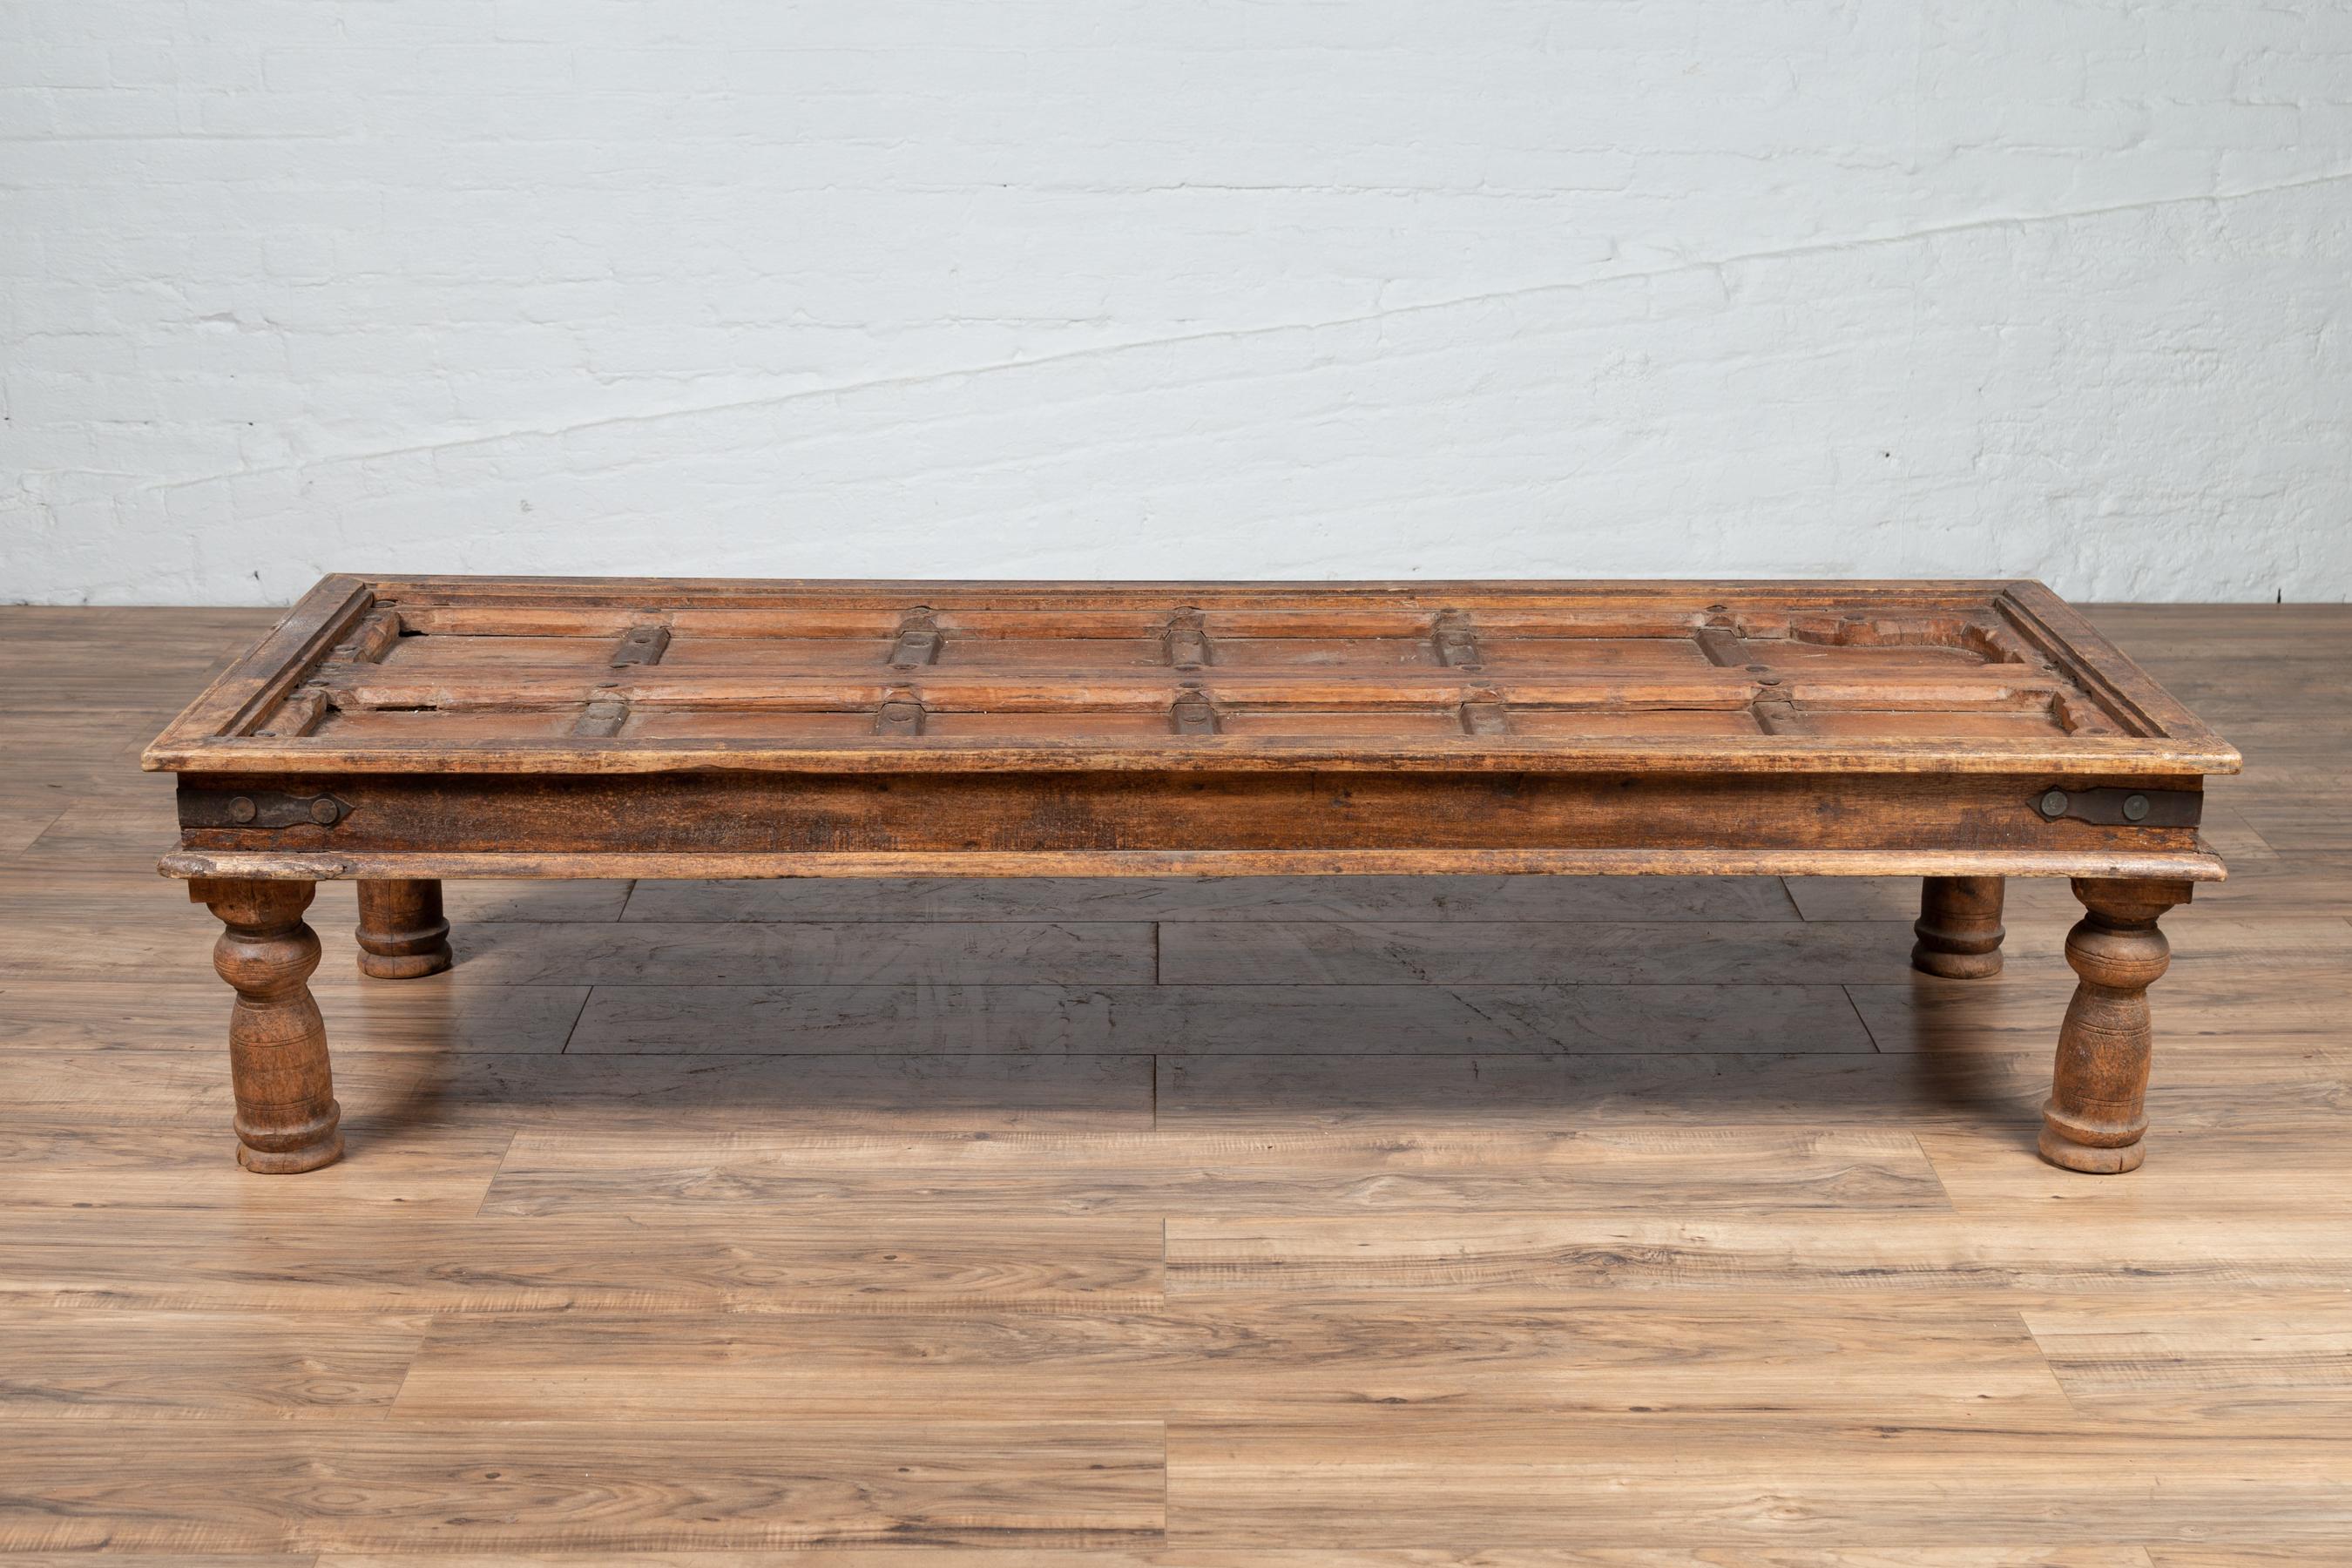 An antique Indian palace wooden door made into a coffee table with iron accents. Born in India during the early years of the 20th century, this exquisite palace door has been transformed into a coffee table. The top is rhythmically accented with